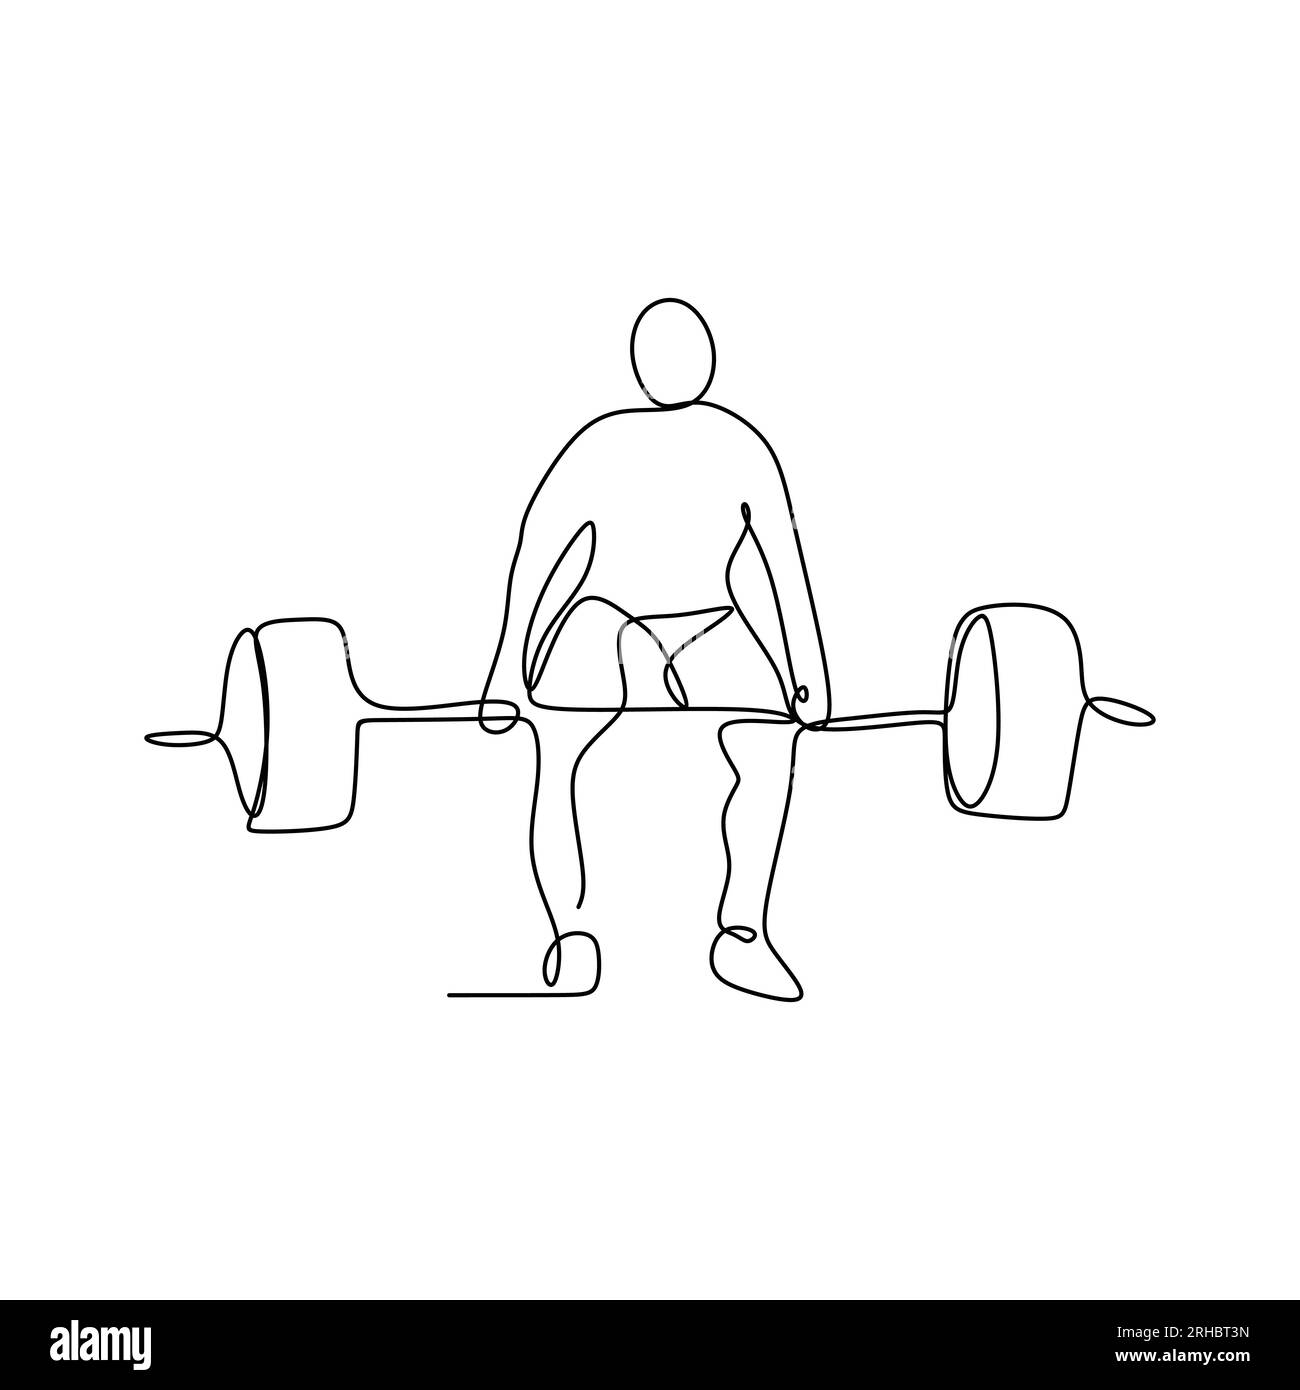 drawing a continuous line of weightlifting position. Stock Vector